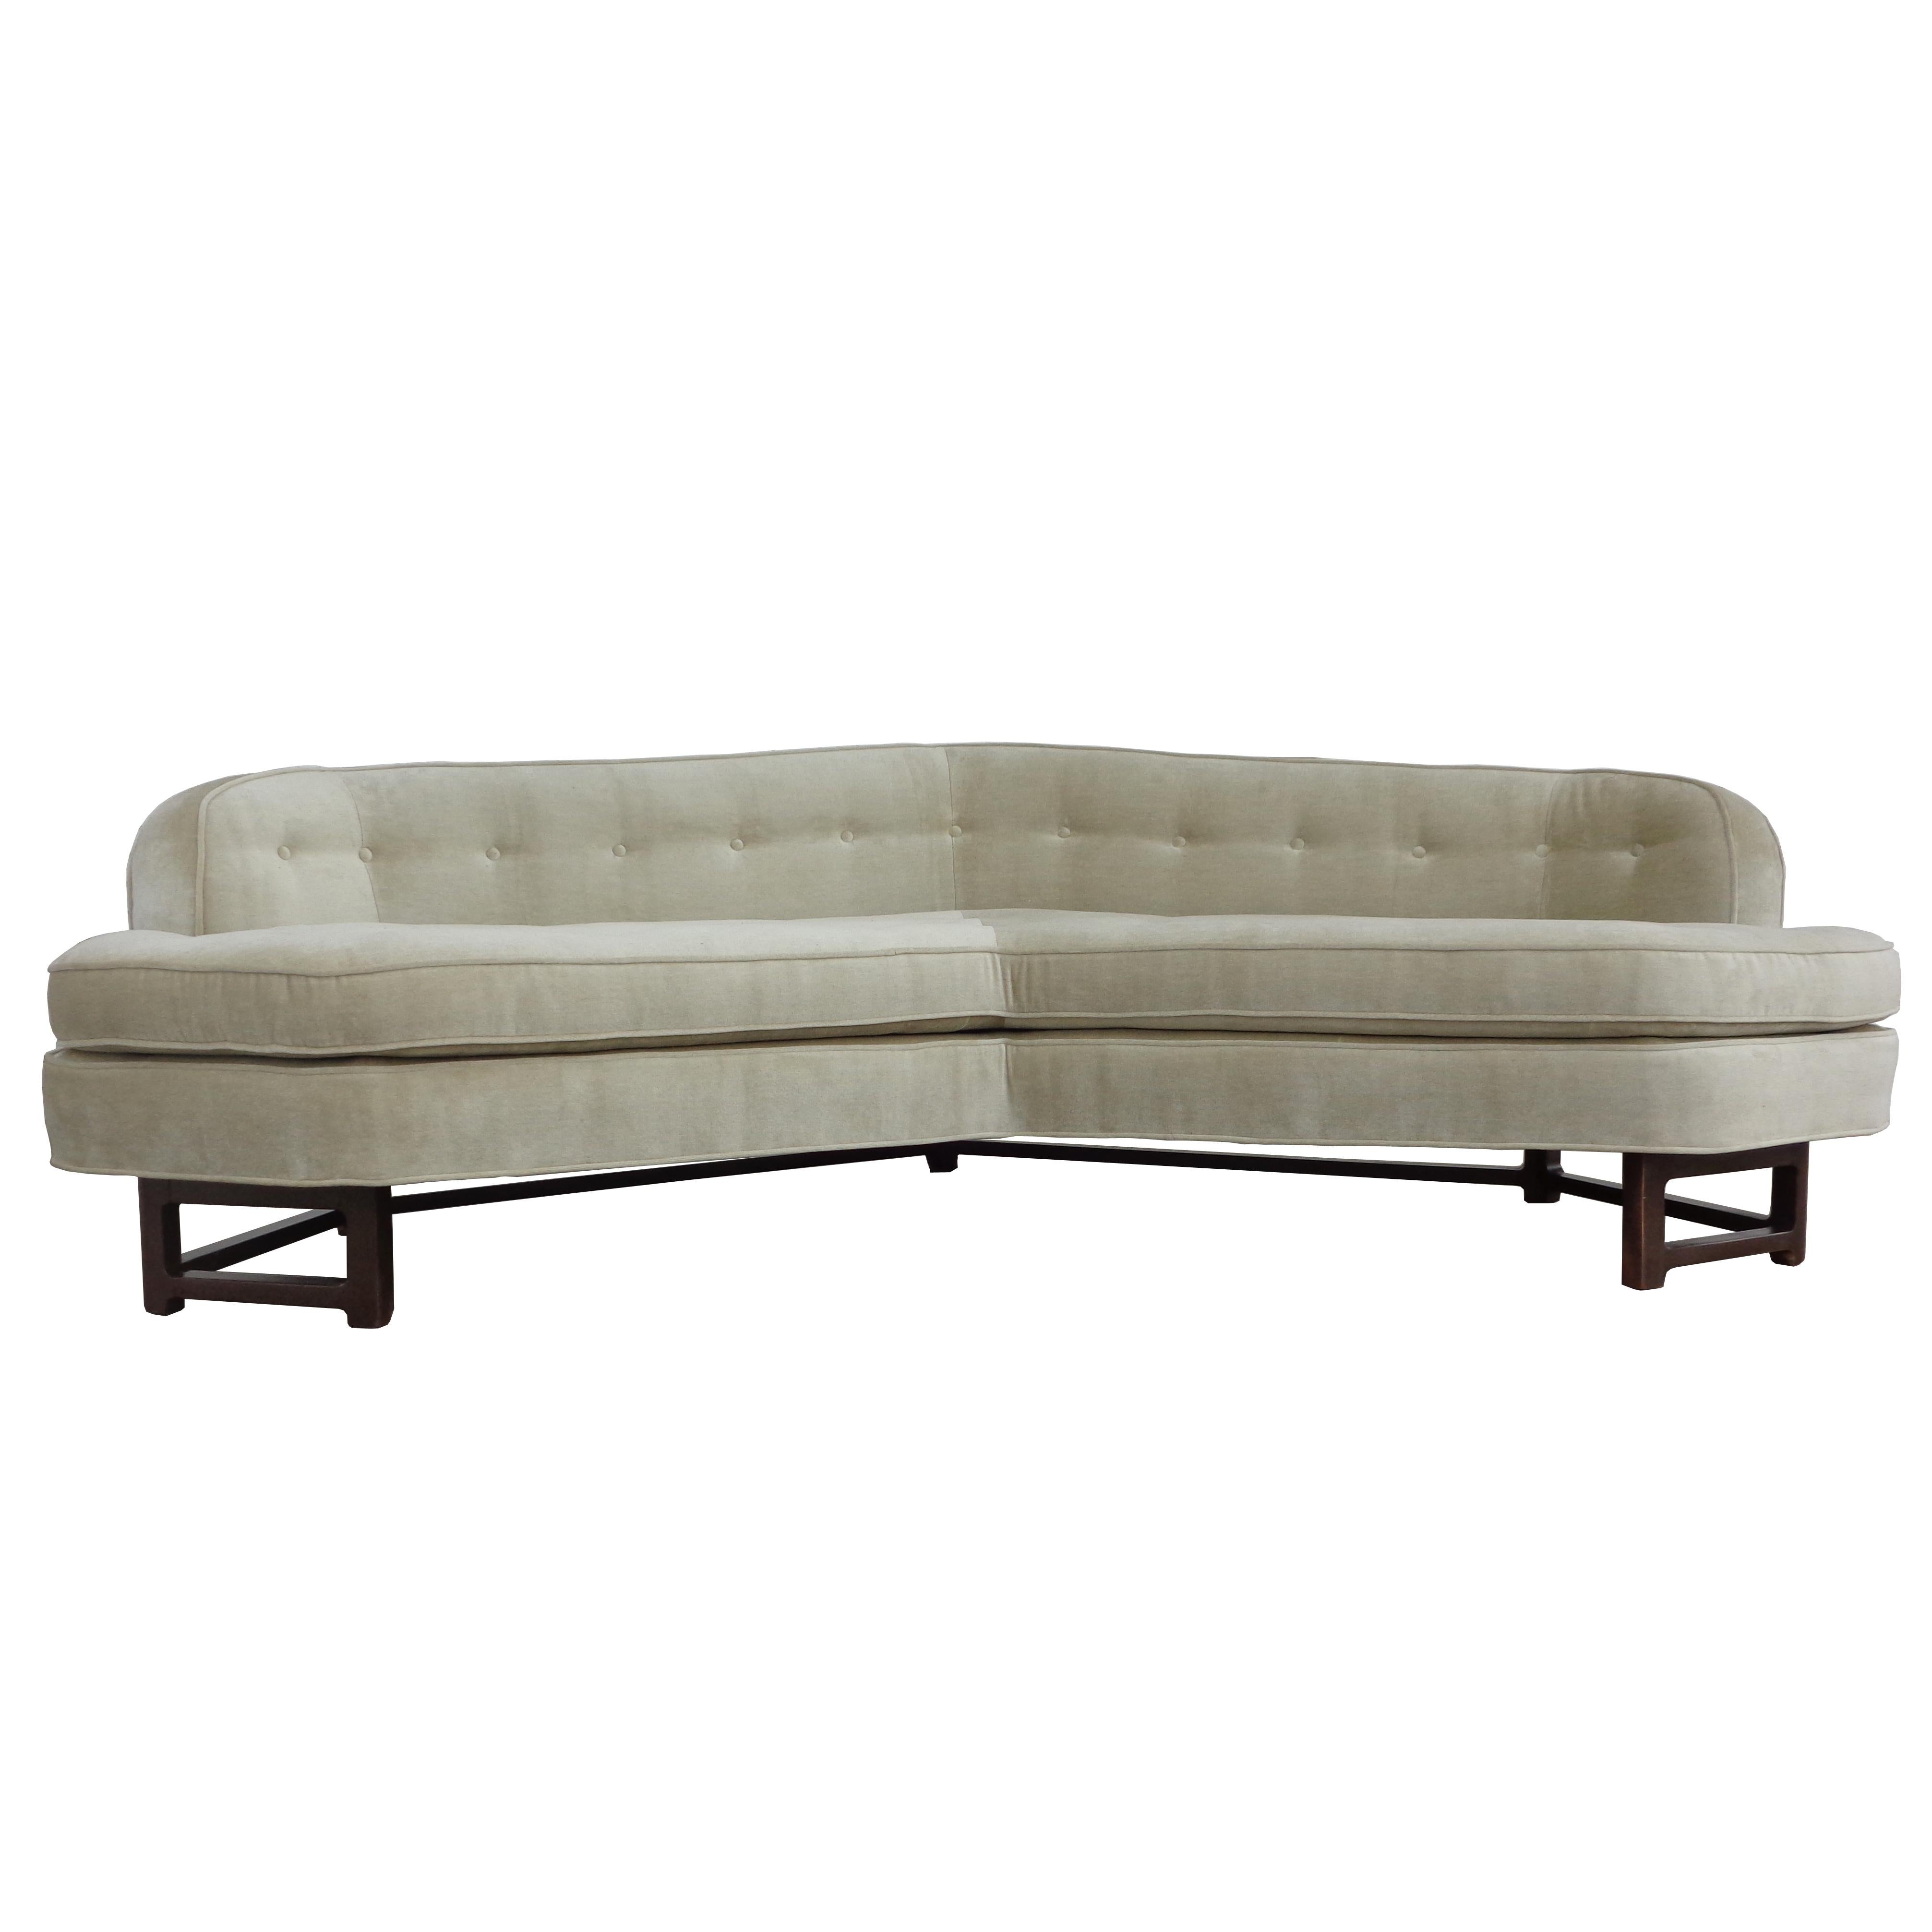 Janus sofa #6329 by Edward Wormley for Dunbar 

Stunning sofa recently restored in champagne velvet with tufting. Mahogany base.




 